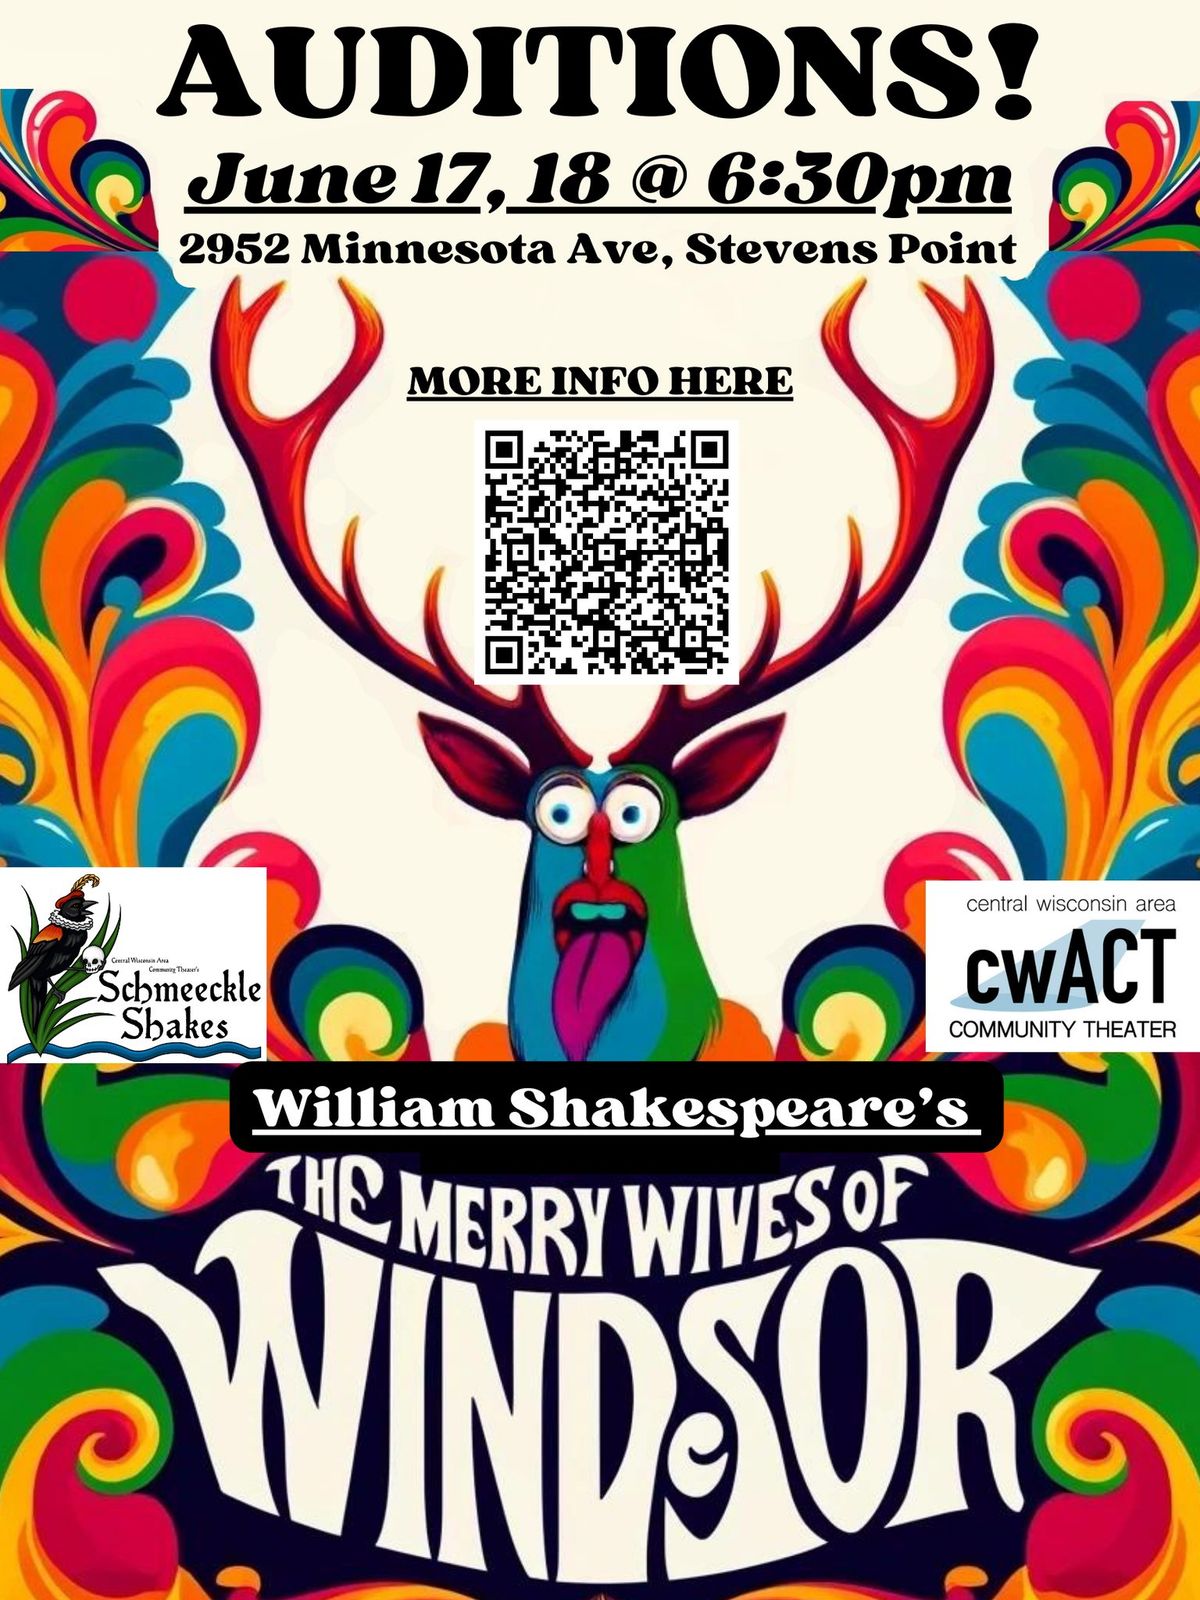 Auditions - The Merry Wives of Windsor - Schmeeckle Shakes